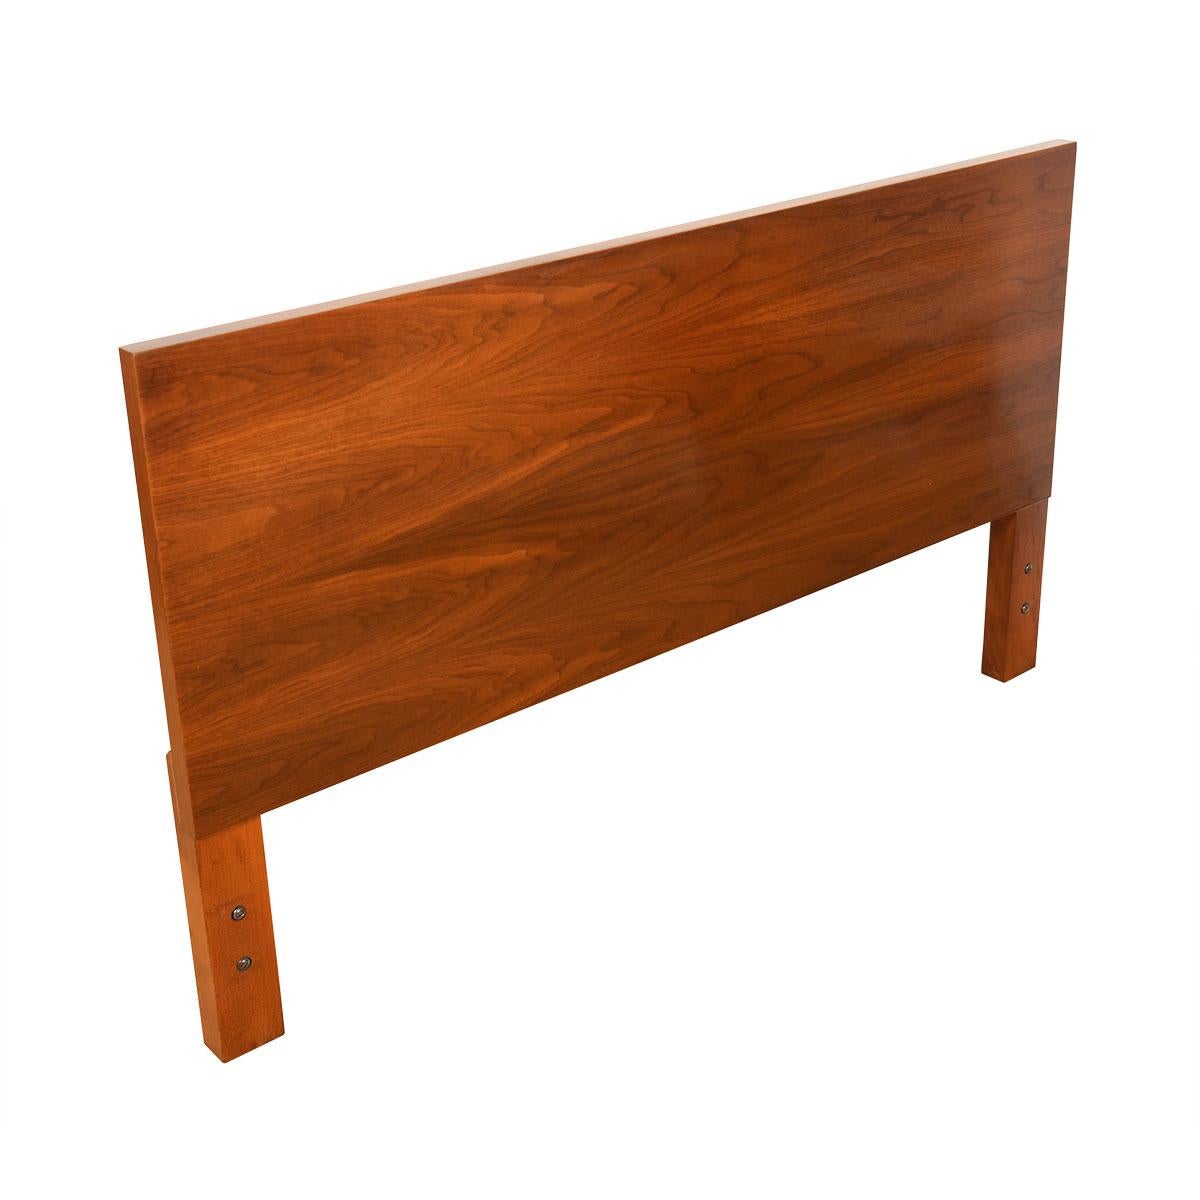 Walnut Headboard by George Nelson for Herman Miller, 1952 

Additional information:
Material: Walnut
Featured at Kensington:
Gorgeous, classic headboard by George Nelson for Herman Miller.
Timeless minimalist design allows the beauty of the